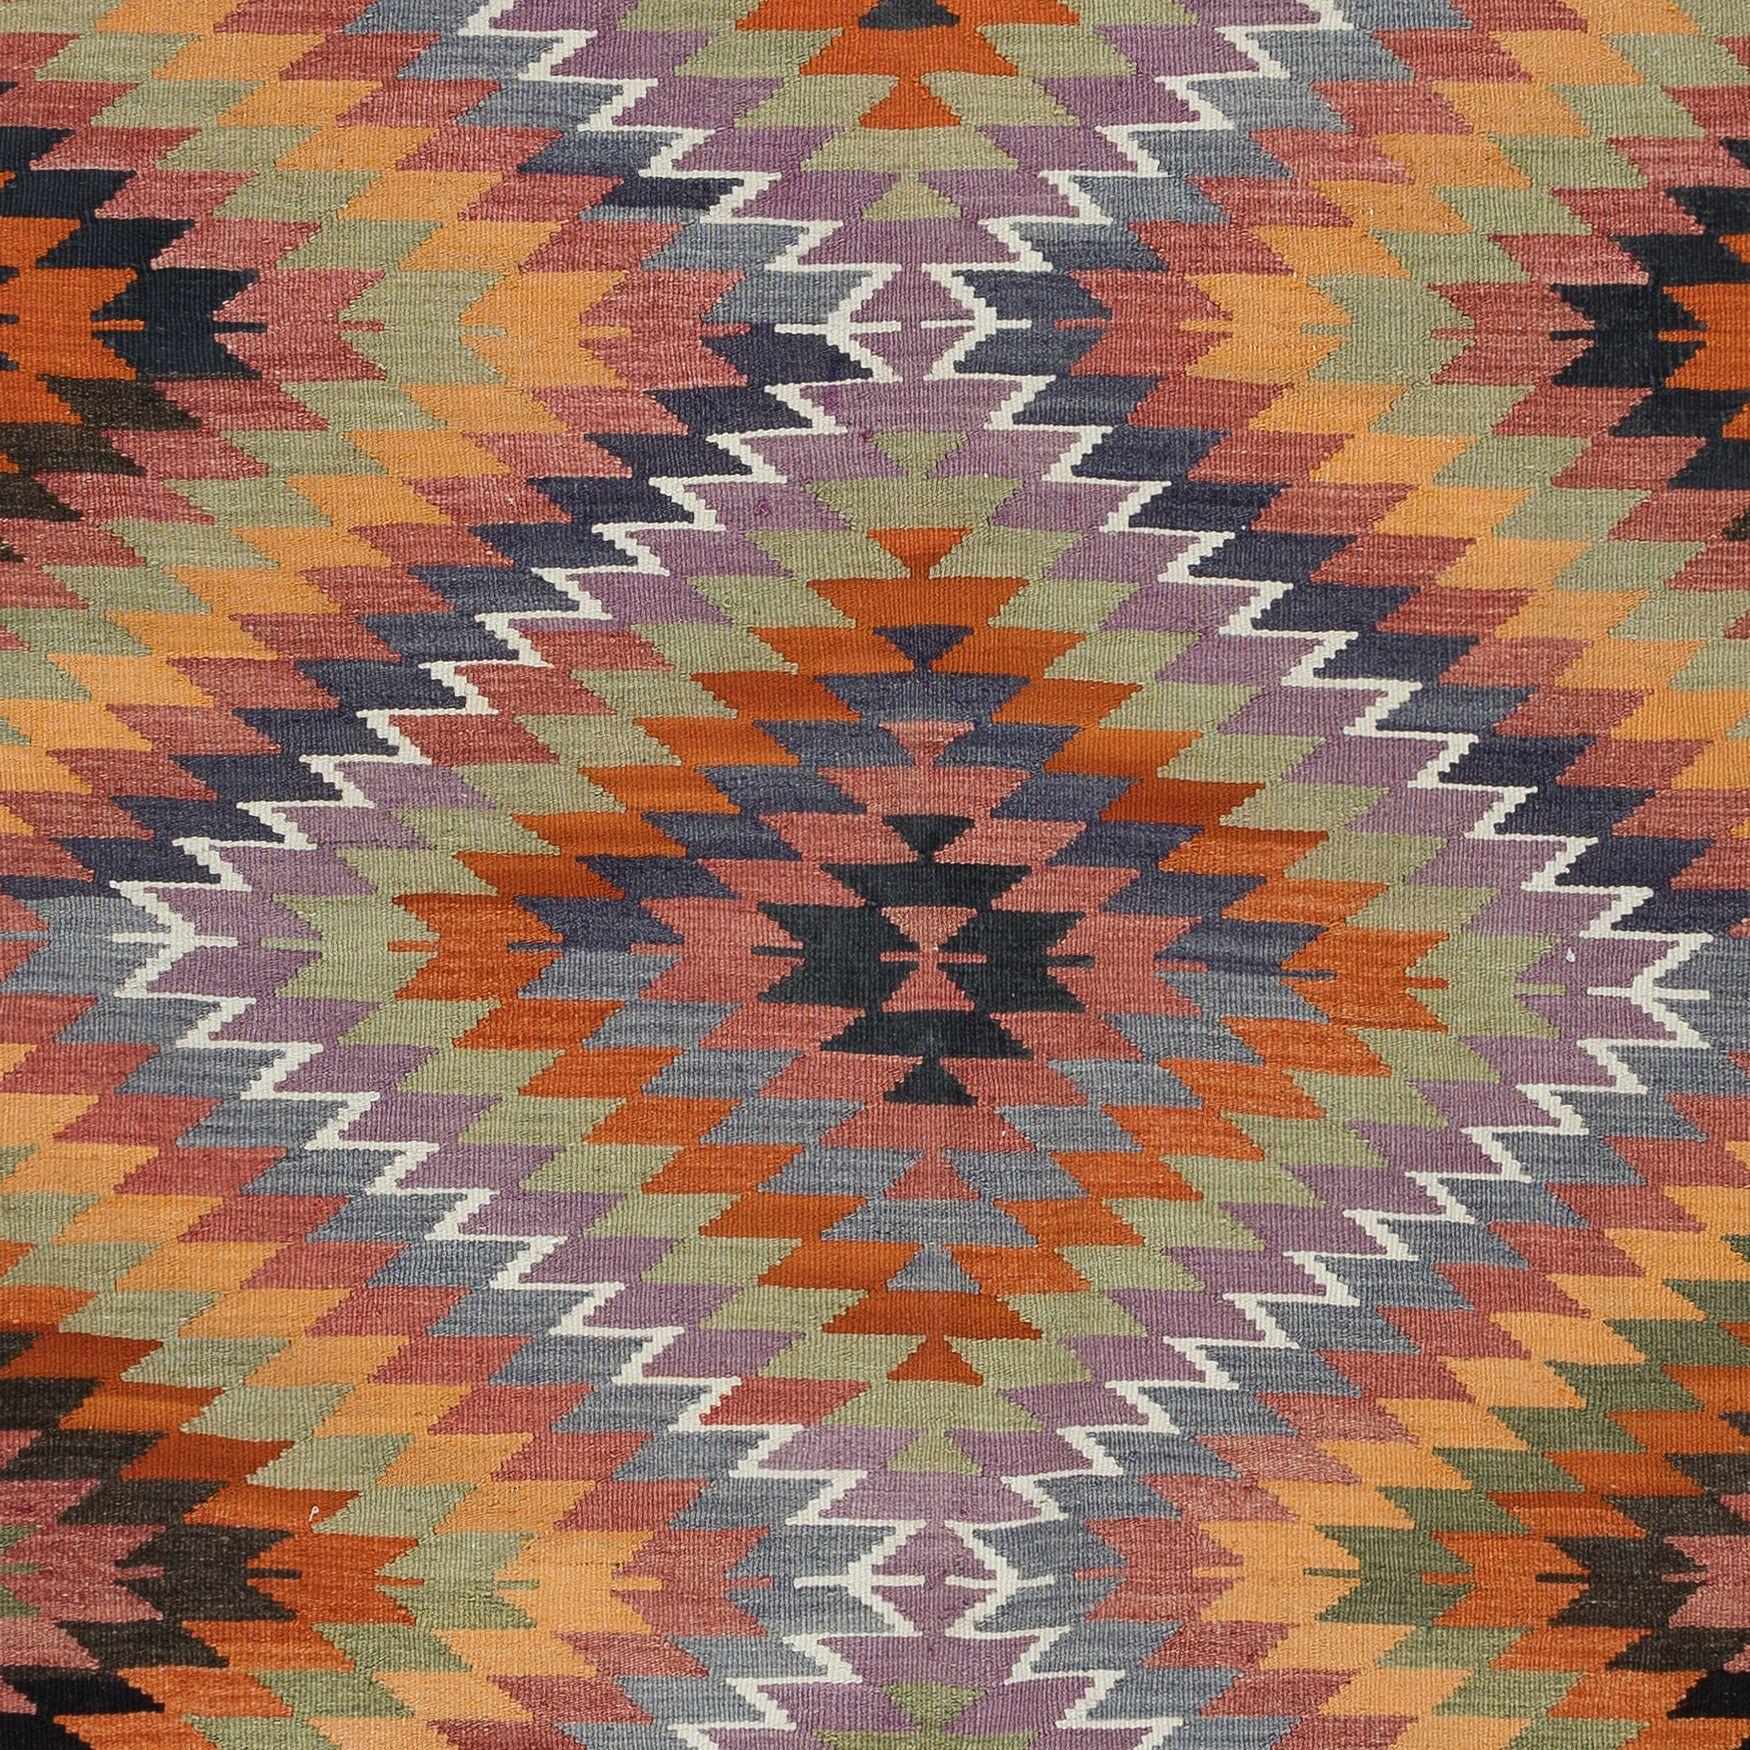 5.6x9.4 Ft Colorful Flat-Weave Turkish Wool Kilim, Vintage Diamond Design Rug In Good Condition For Sale In Philadelphia, PA